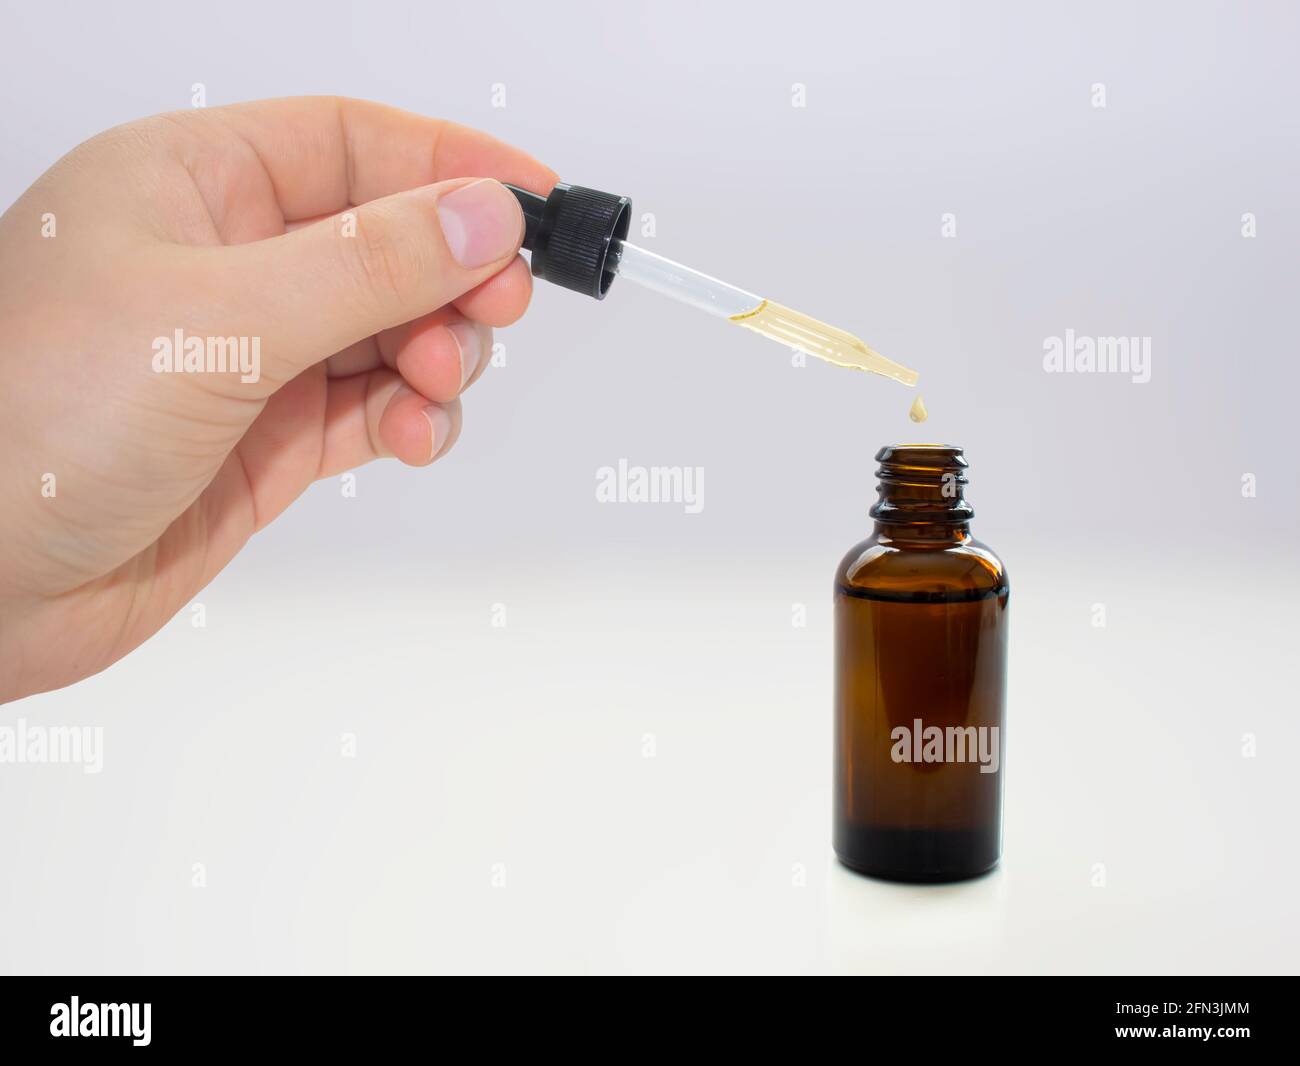 A person dropping cannabis oil on an amber bottle on clear background. Stock Photo